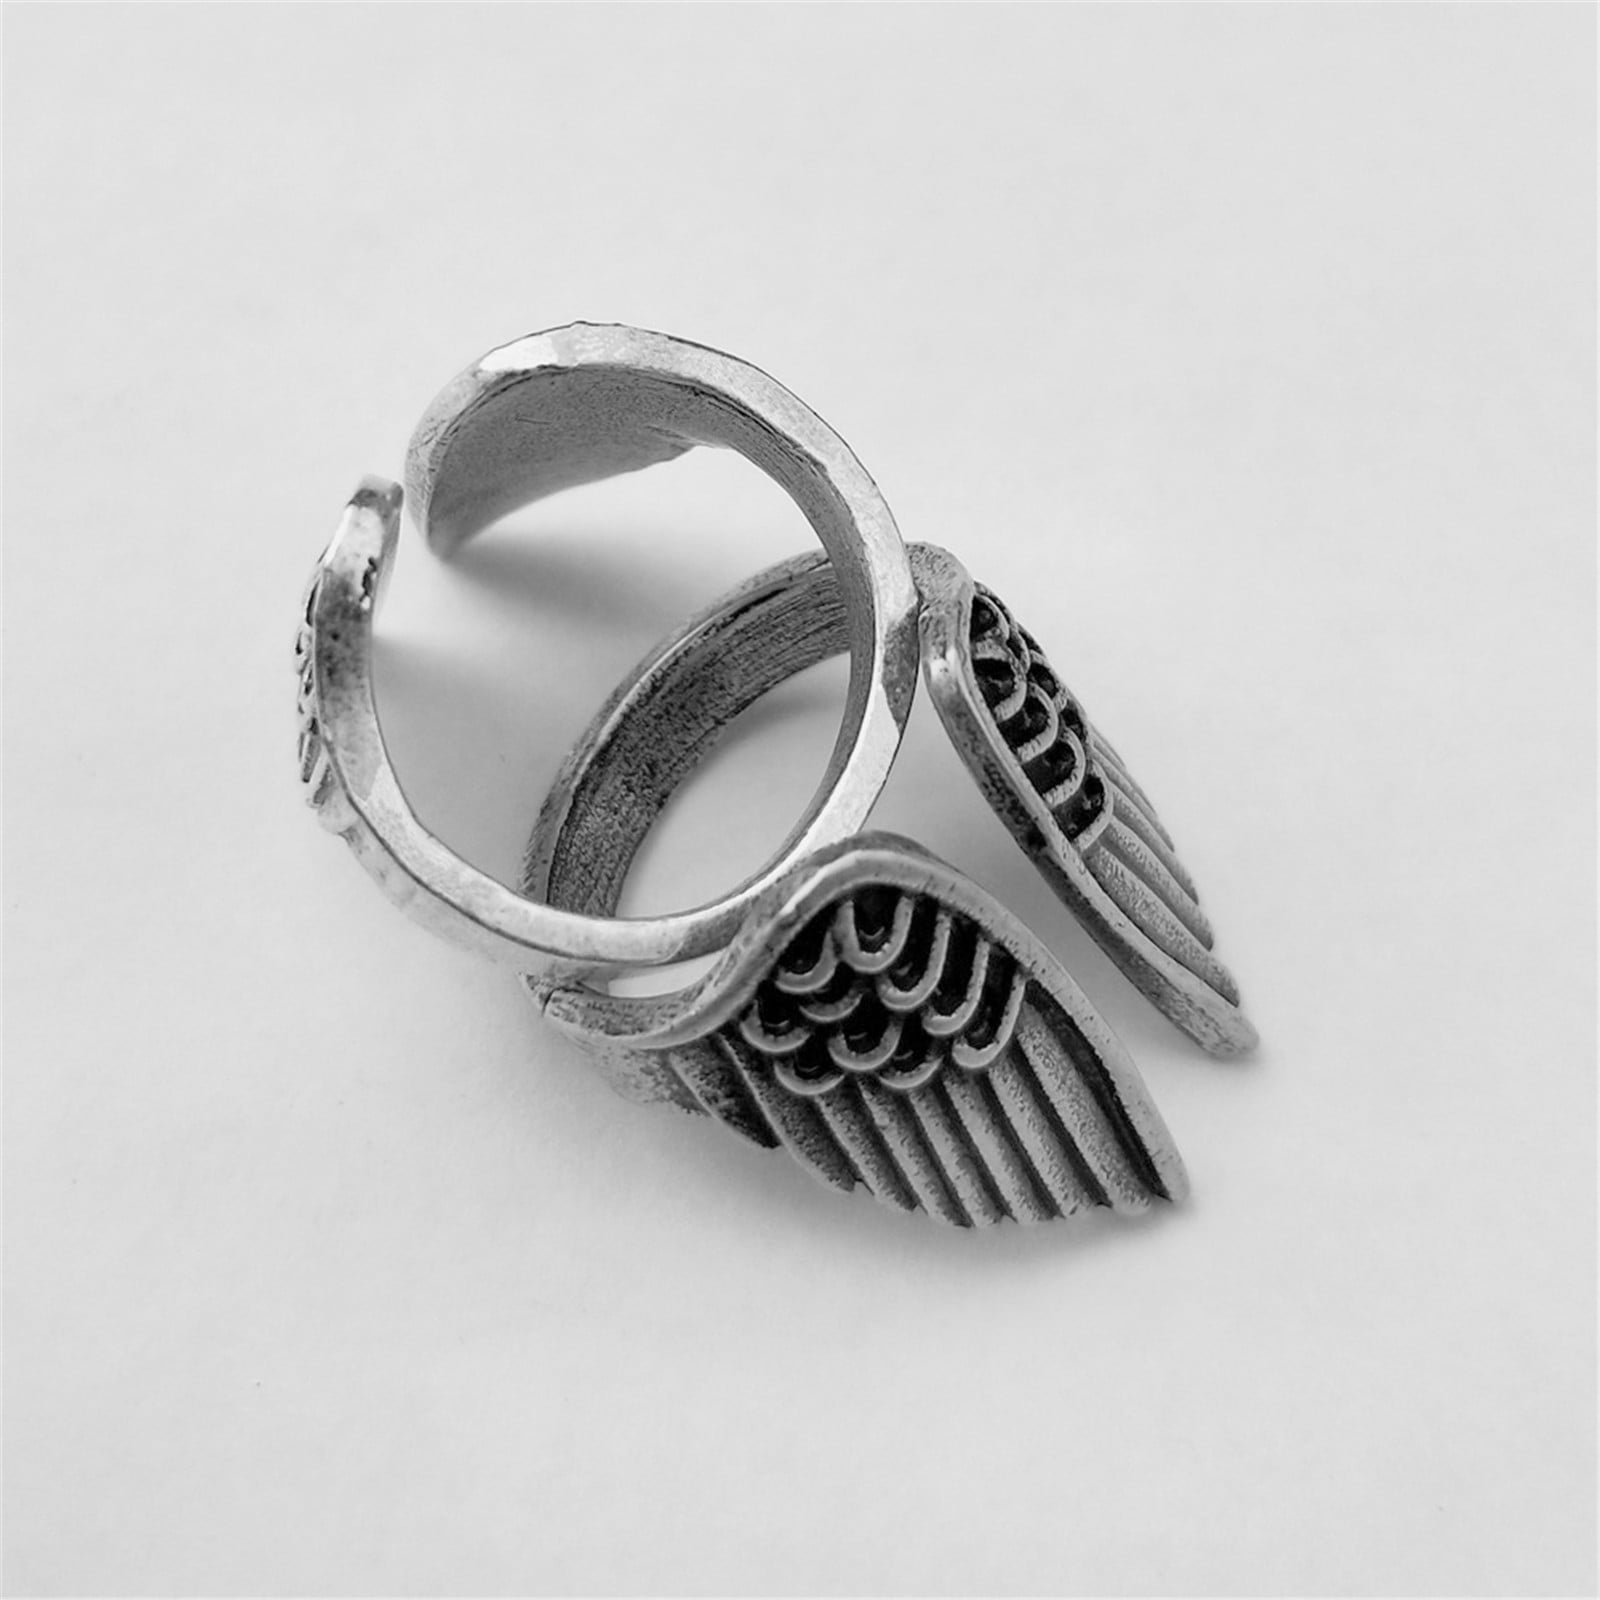 Steel Pen Crafts Free Express Shipping Handmade Ring Falcon Jewelry Sterling Silver Men Ring Created Pink Quartz Stone 